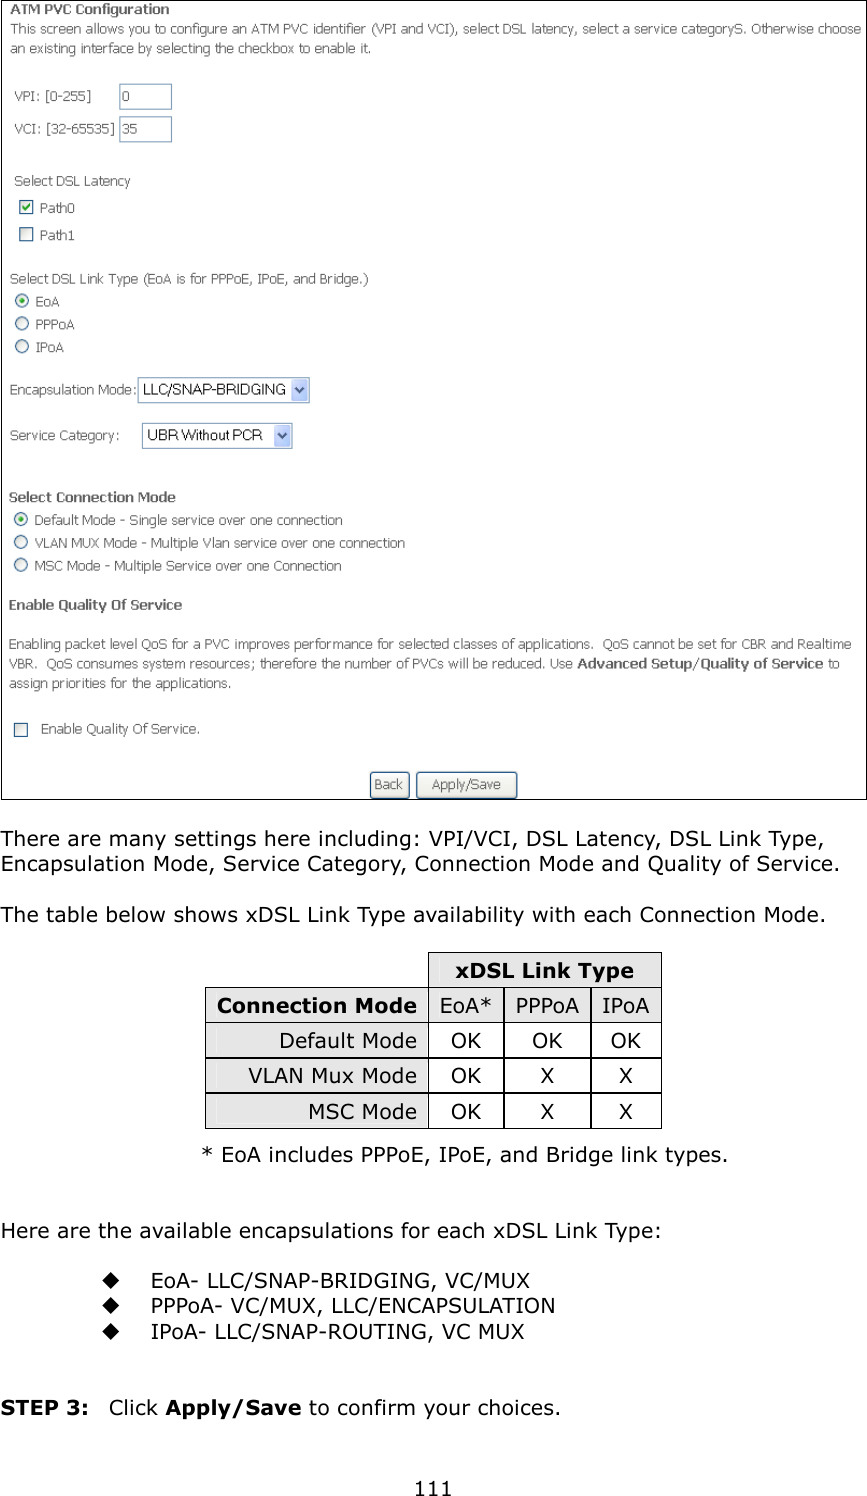   111   There are many settings here including: VPI/VCI, DSL Latency, DSL Link Type, Encapsulation Mode, Service Category, Connection Mode and Quality of Service.      The table below shows xDSL Link Type availability with each Connection Mode.   xDSL Link Type Connection Mode EoA* PPPoA IPoA Default Mode OK  OK  OK VLAN Mux Mode OK  X  X MSC Mode OK  X  X   * EoA includes PPPoE, IPoE, and Bridge link types.   Here are the available encapsulations for each xDSL Link Type:    EoA- LLC/SNAP-BRIDGING, VC/MUX   PPPoA- VC/MUX, LLC/ENCAPSULATION   IPoA- LLC/SNAP-ROUTING, VC MUX   STEP 3:  Click Apply/Save to confirm your choices.    